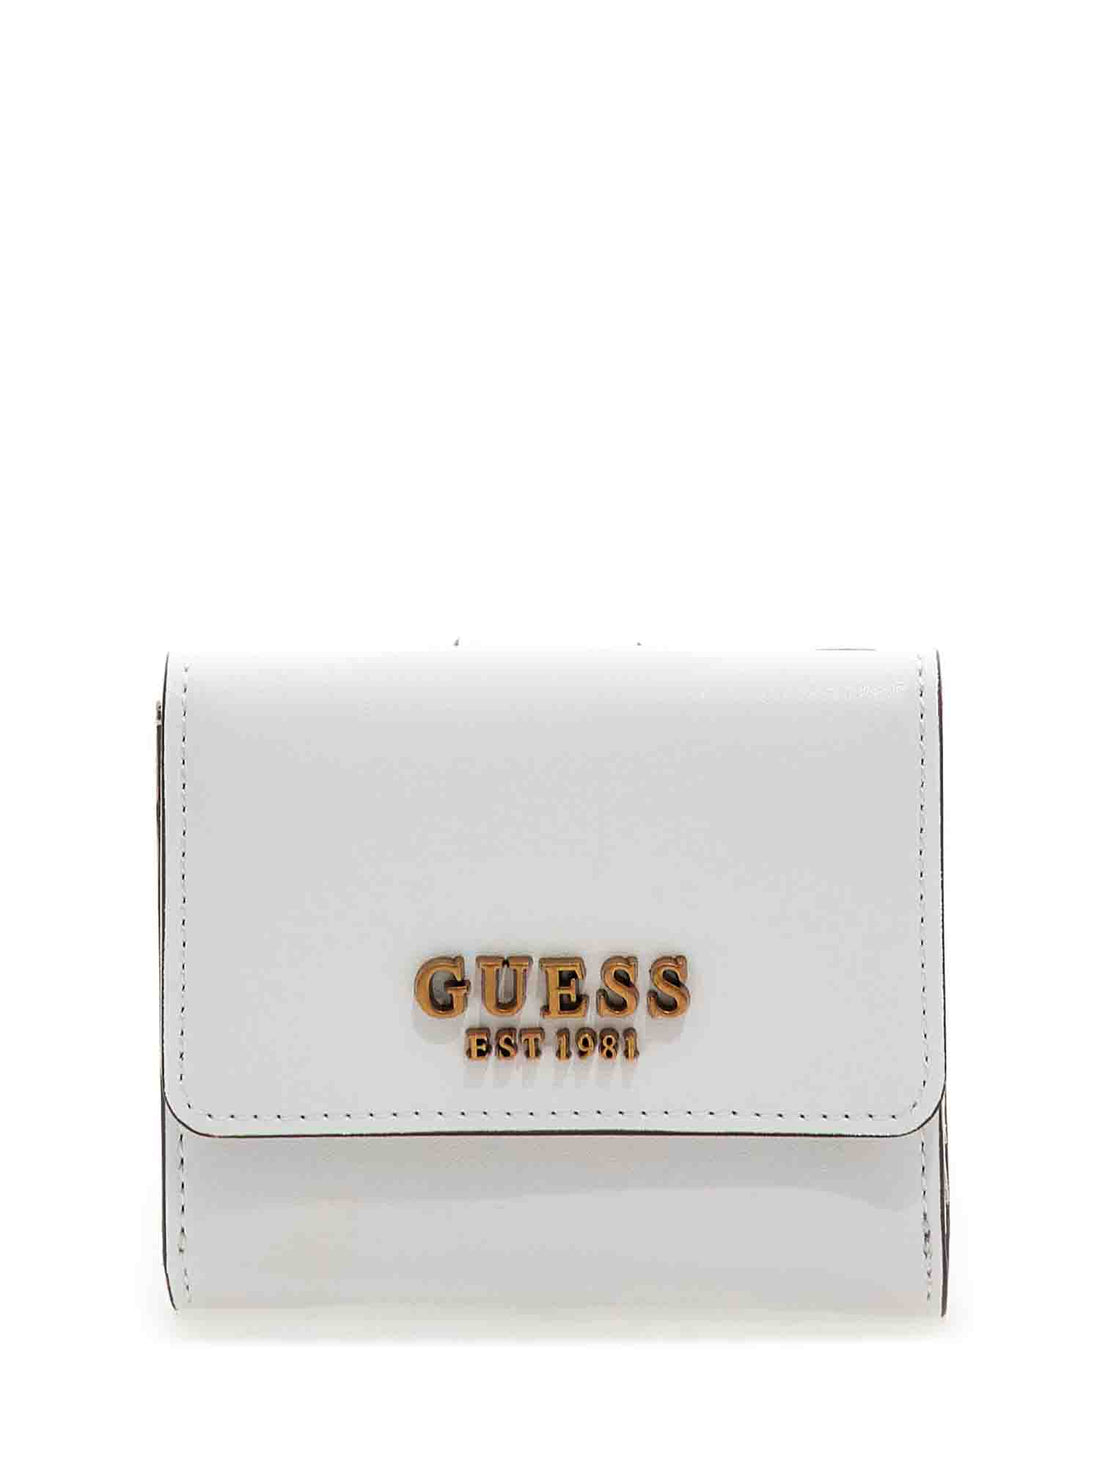 Guess Wallet SWVB85 00440